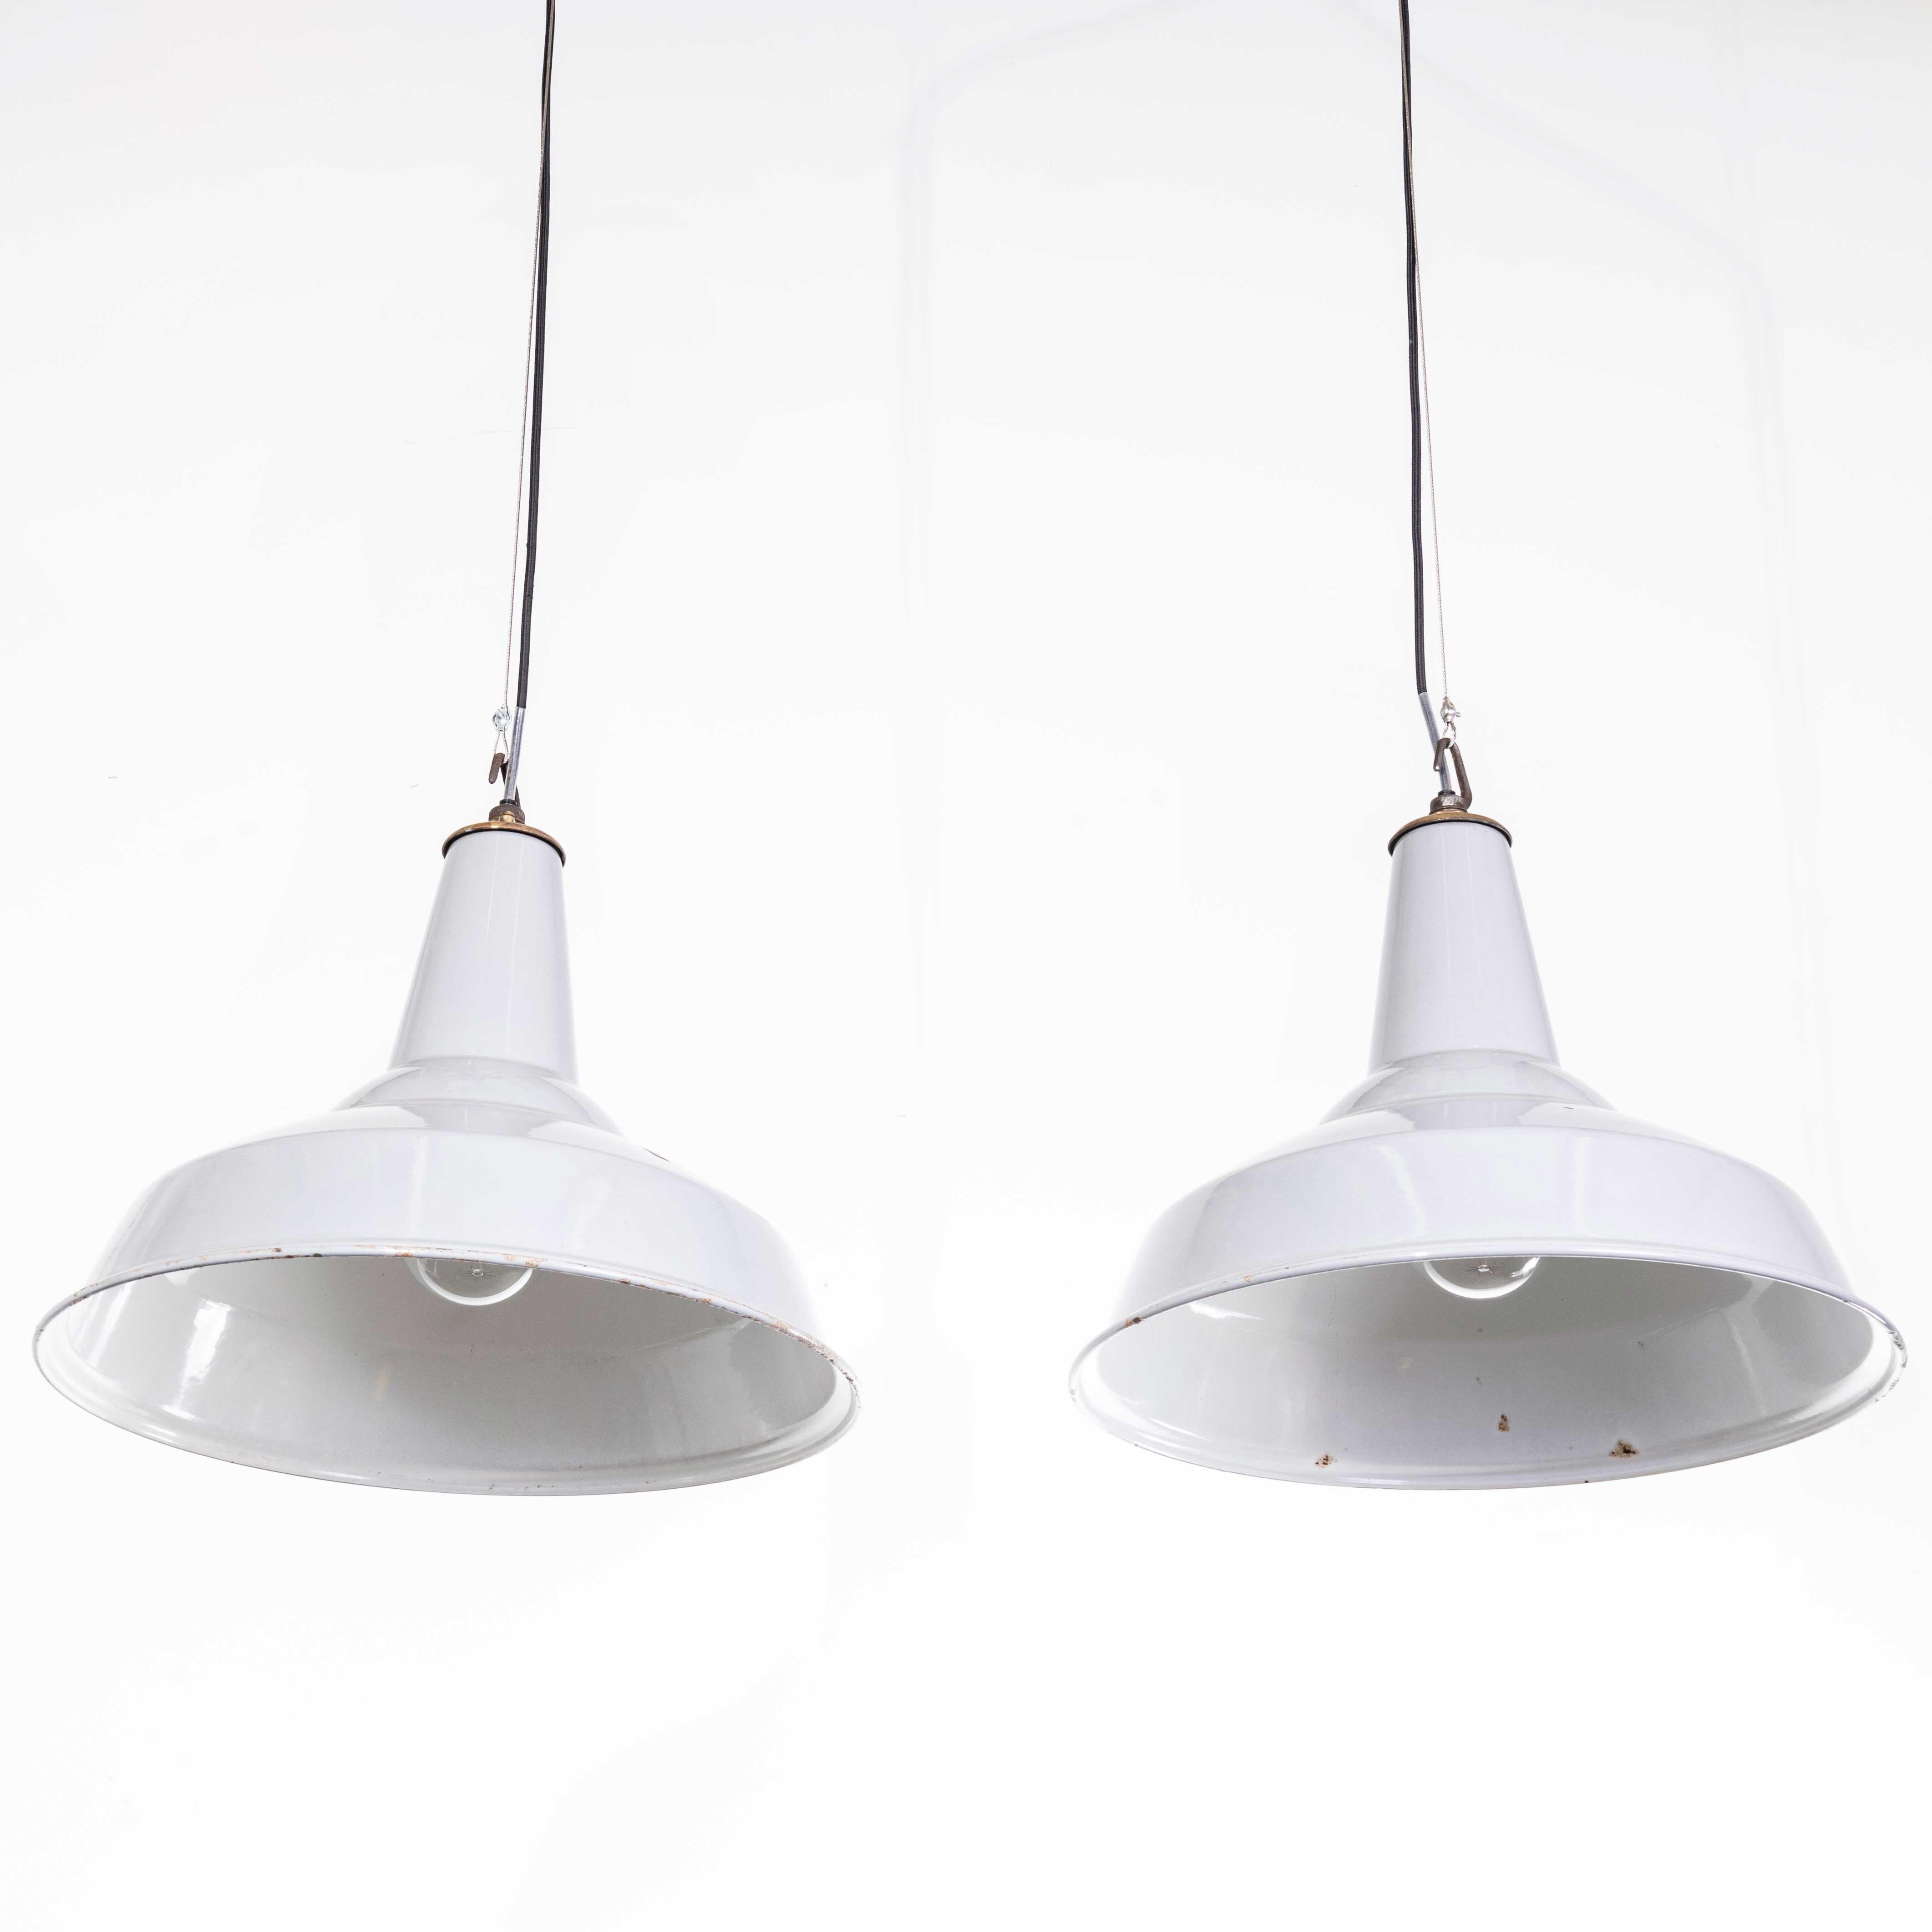 1950’s Industrial Benjamin Enamelled Pendant Lamps 16 Inch – Pair
1950’s Industrial Benjamin Enamelled Pendant Lamps 16 Inch – Pair. Benjamin was arguably the market leader in industrial lighting in the 1930’s through to 1960’s. Their main market